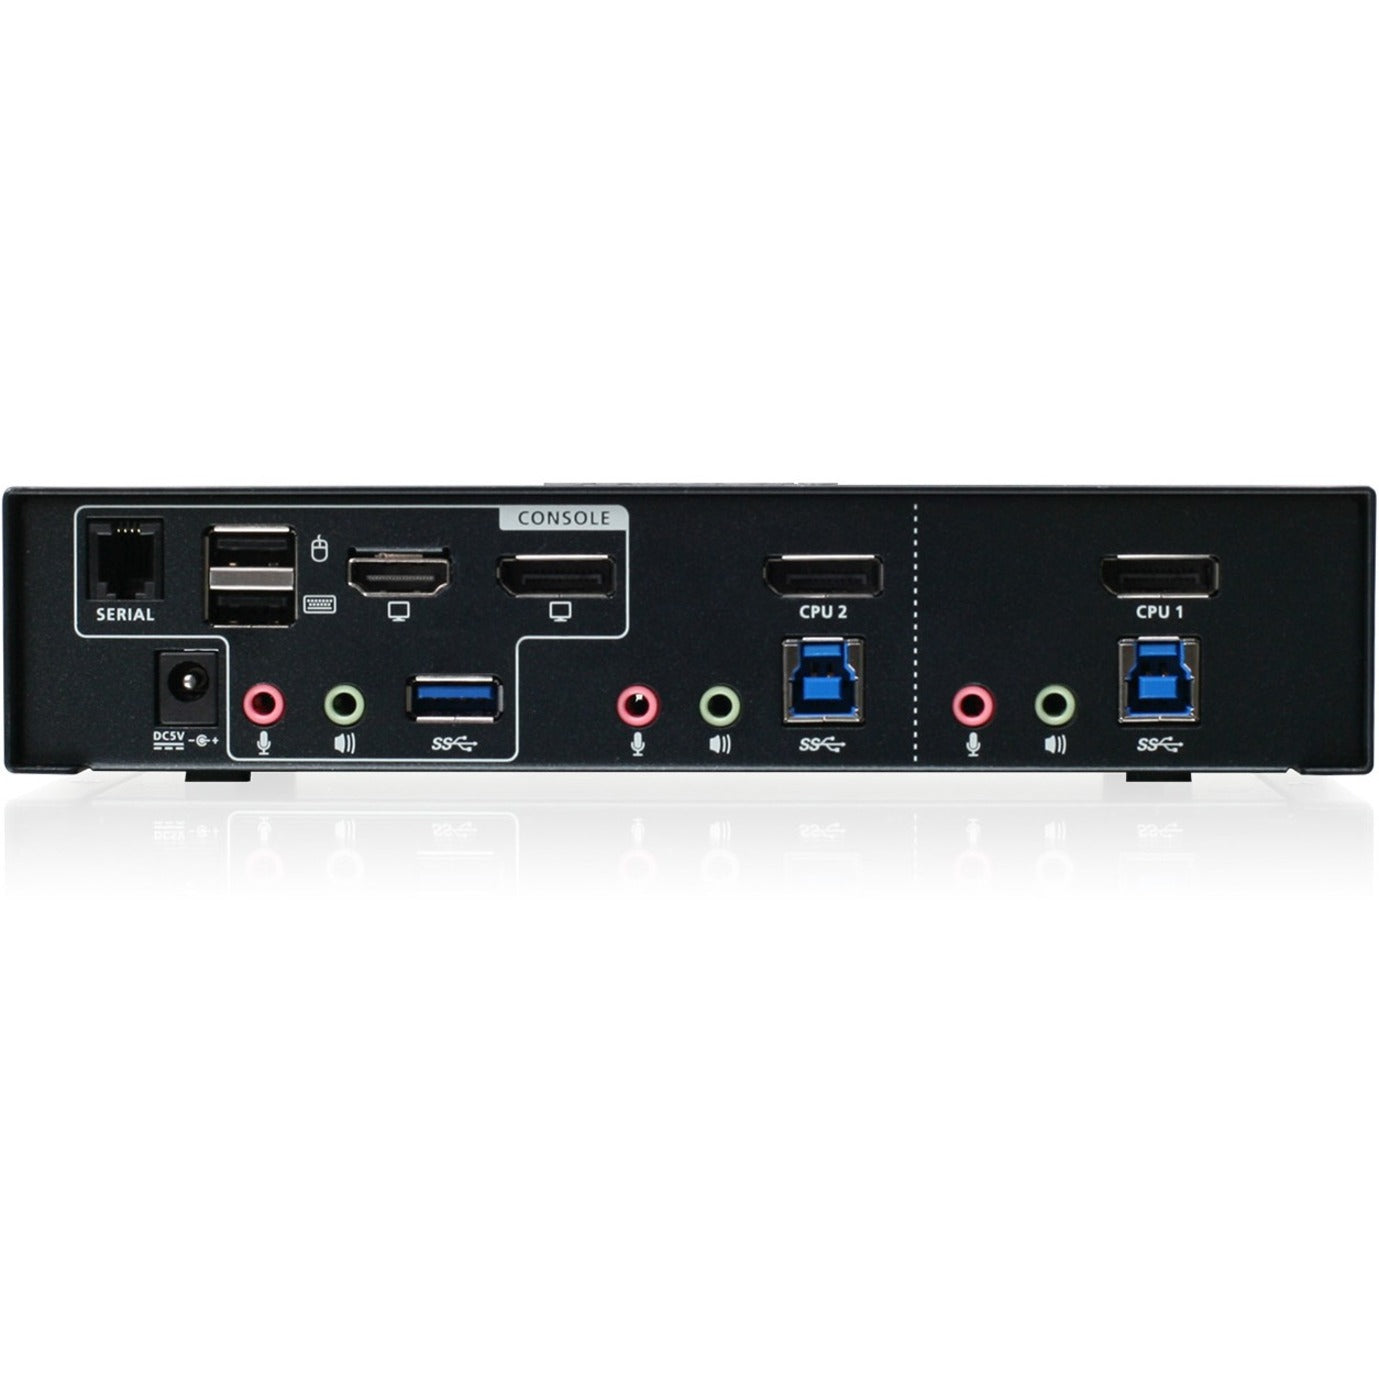 IOGEAR GCS1932M 2-Port 4K DisplayPort KVMP Switch with Dual Video Out and RS-232, Maximum Video Resolution 4096 x 2160, 3 Year Warranty